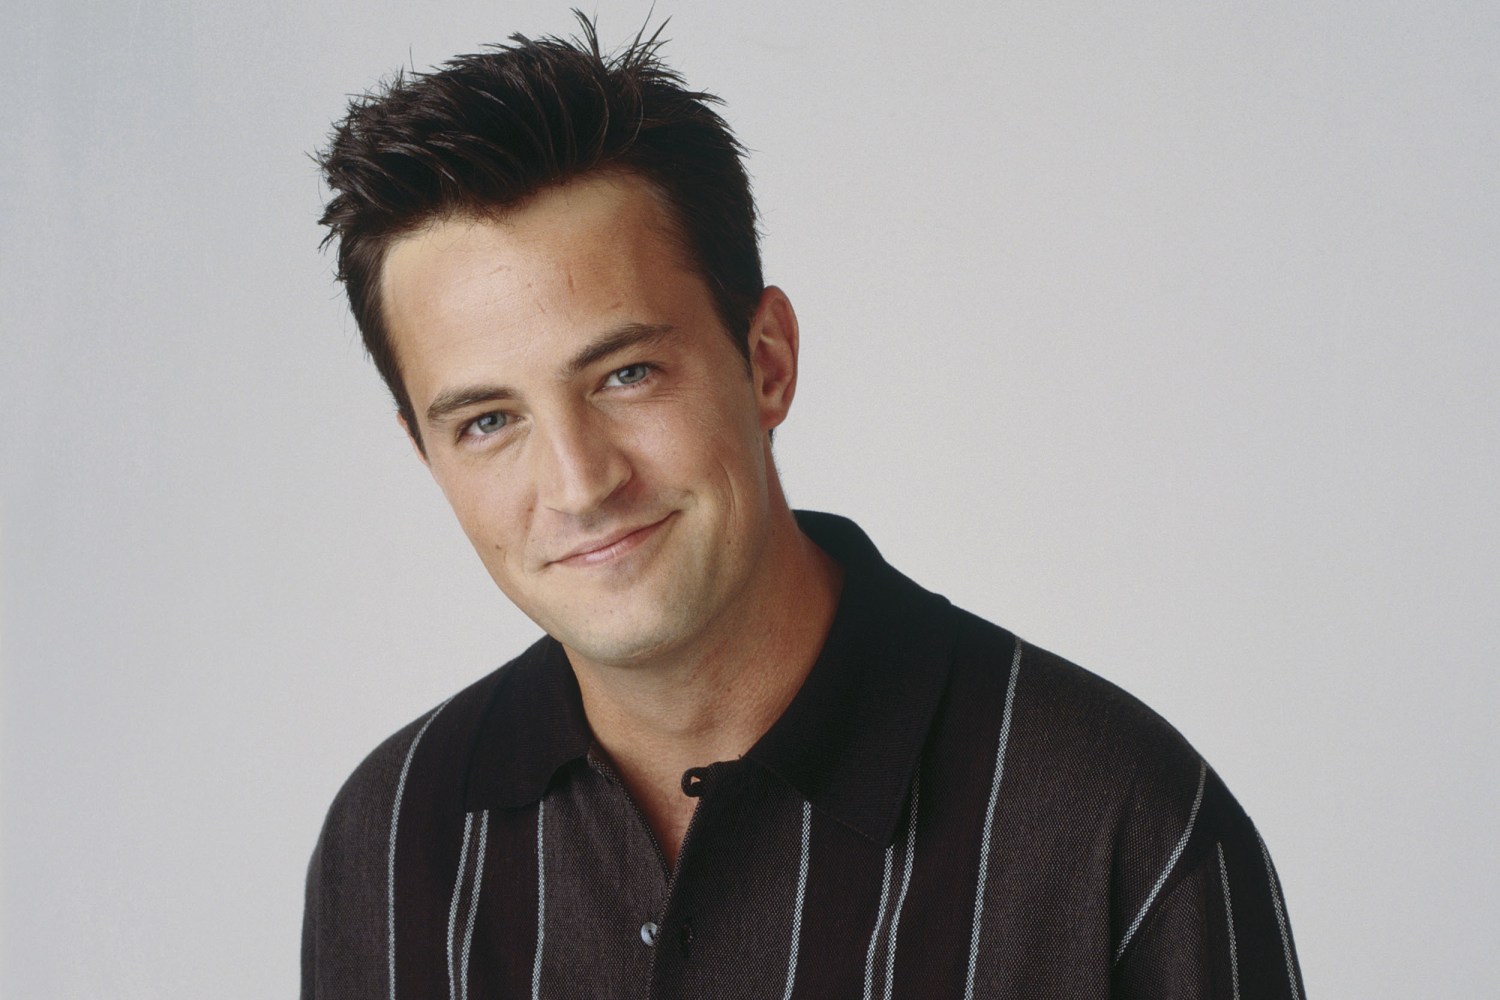 Matthew Perry Dead: Chandler From 'Friends' Dies at 54